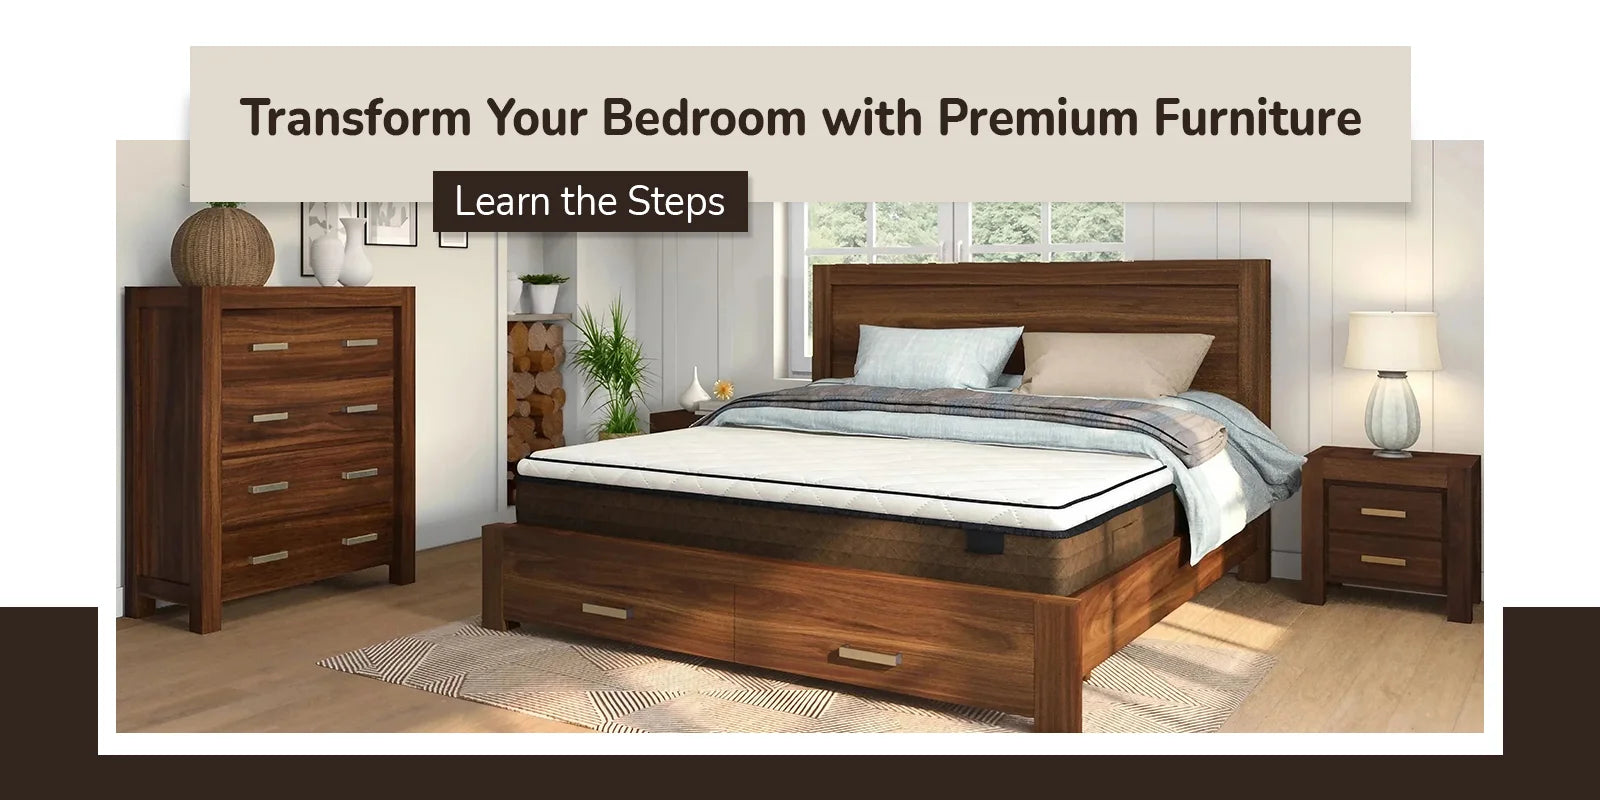 Redefine Your Bedroom Aesthetics By Selecting the Finest Pieces of Bedroom Furniture- Learn the Steps